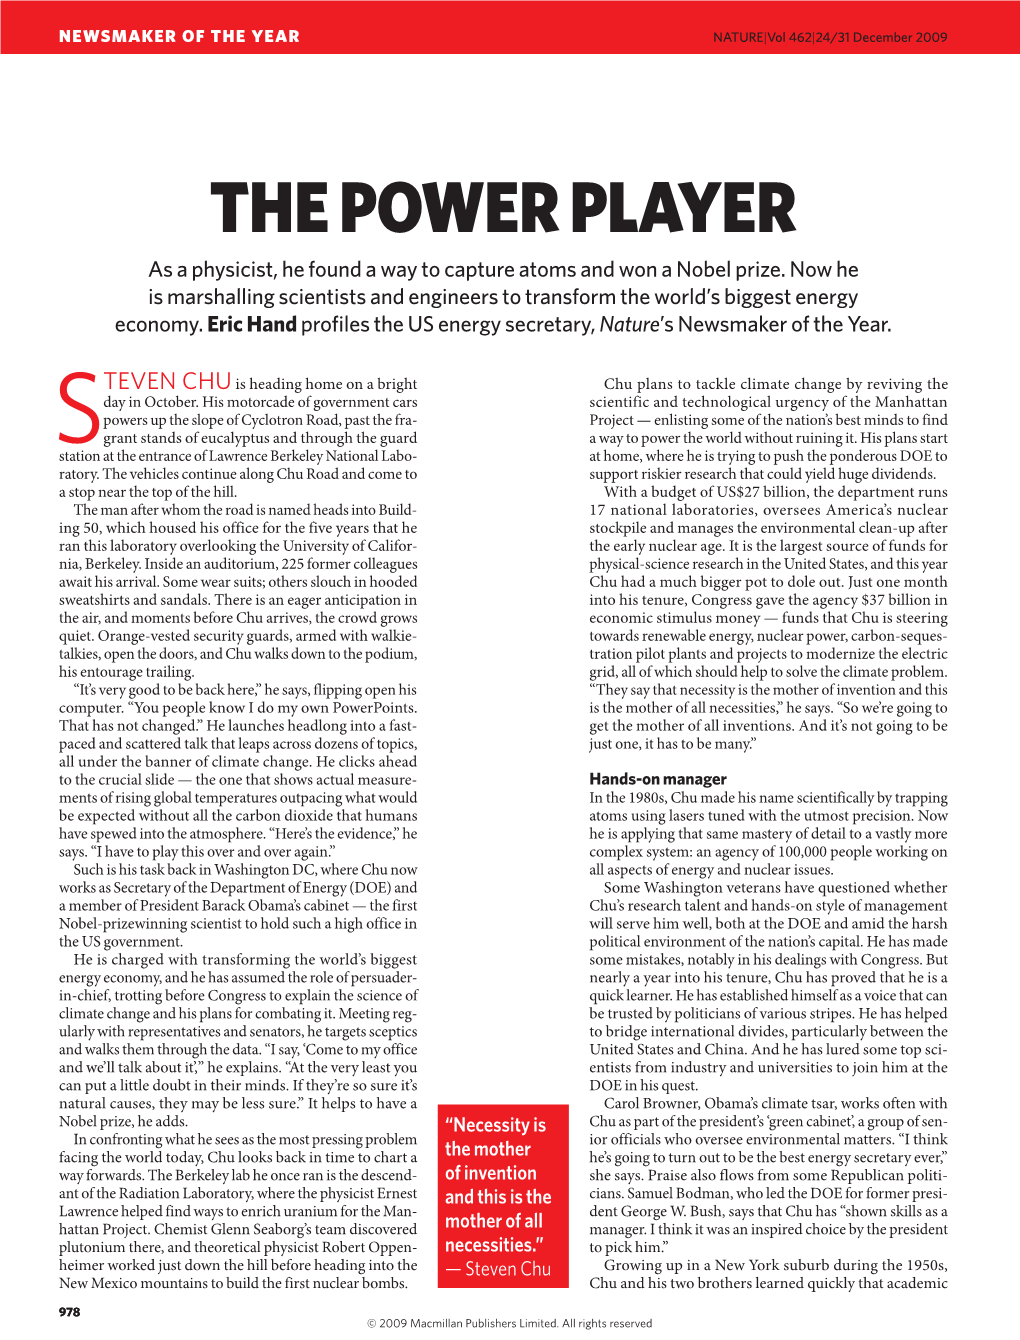 Newsmaker of the Year: the Power Player